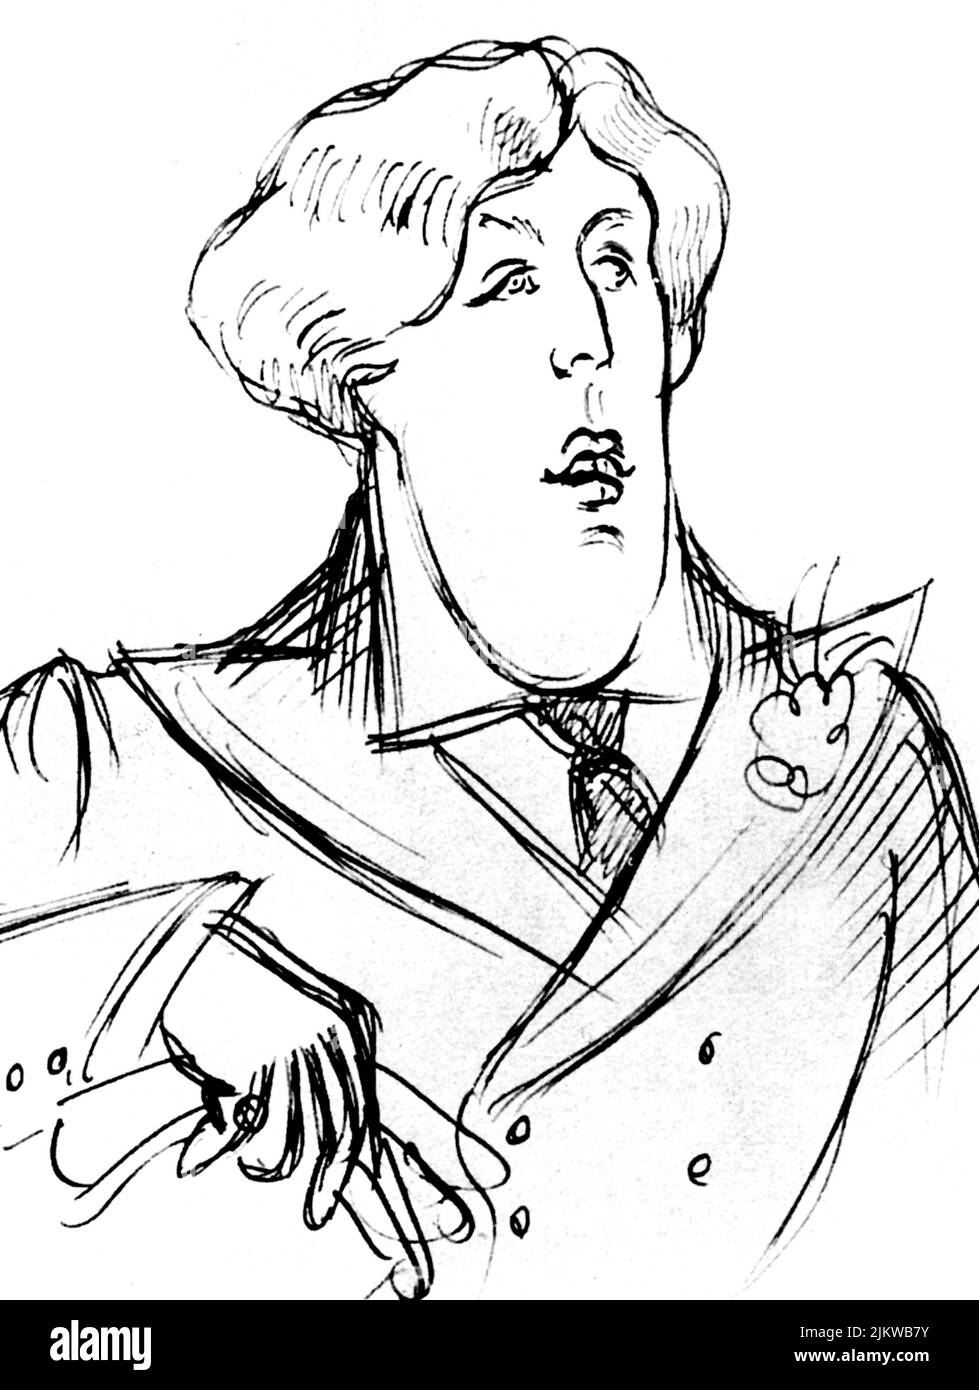 1894 , GREAT BRITAIN : The  celebrated irish writer and dramatist OSCAR WILDE ( 1854 - 1900 ). Portrait by William Rothenstein   - SCRITTORE - LETTERATURA - LITERATURE - POET - POETA - POESIA - DRAMMATURGO - playwriter - play-writer - TEATRO - THEATER - THEATRE  - POETRY  - GAY - HOMOSEXUAL - HOMOSEXUALITY - omosessuale - omosessualità  - portrait - ritratto  ----  Archivio GBB Stock Photo